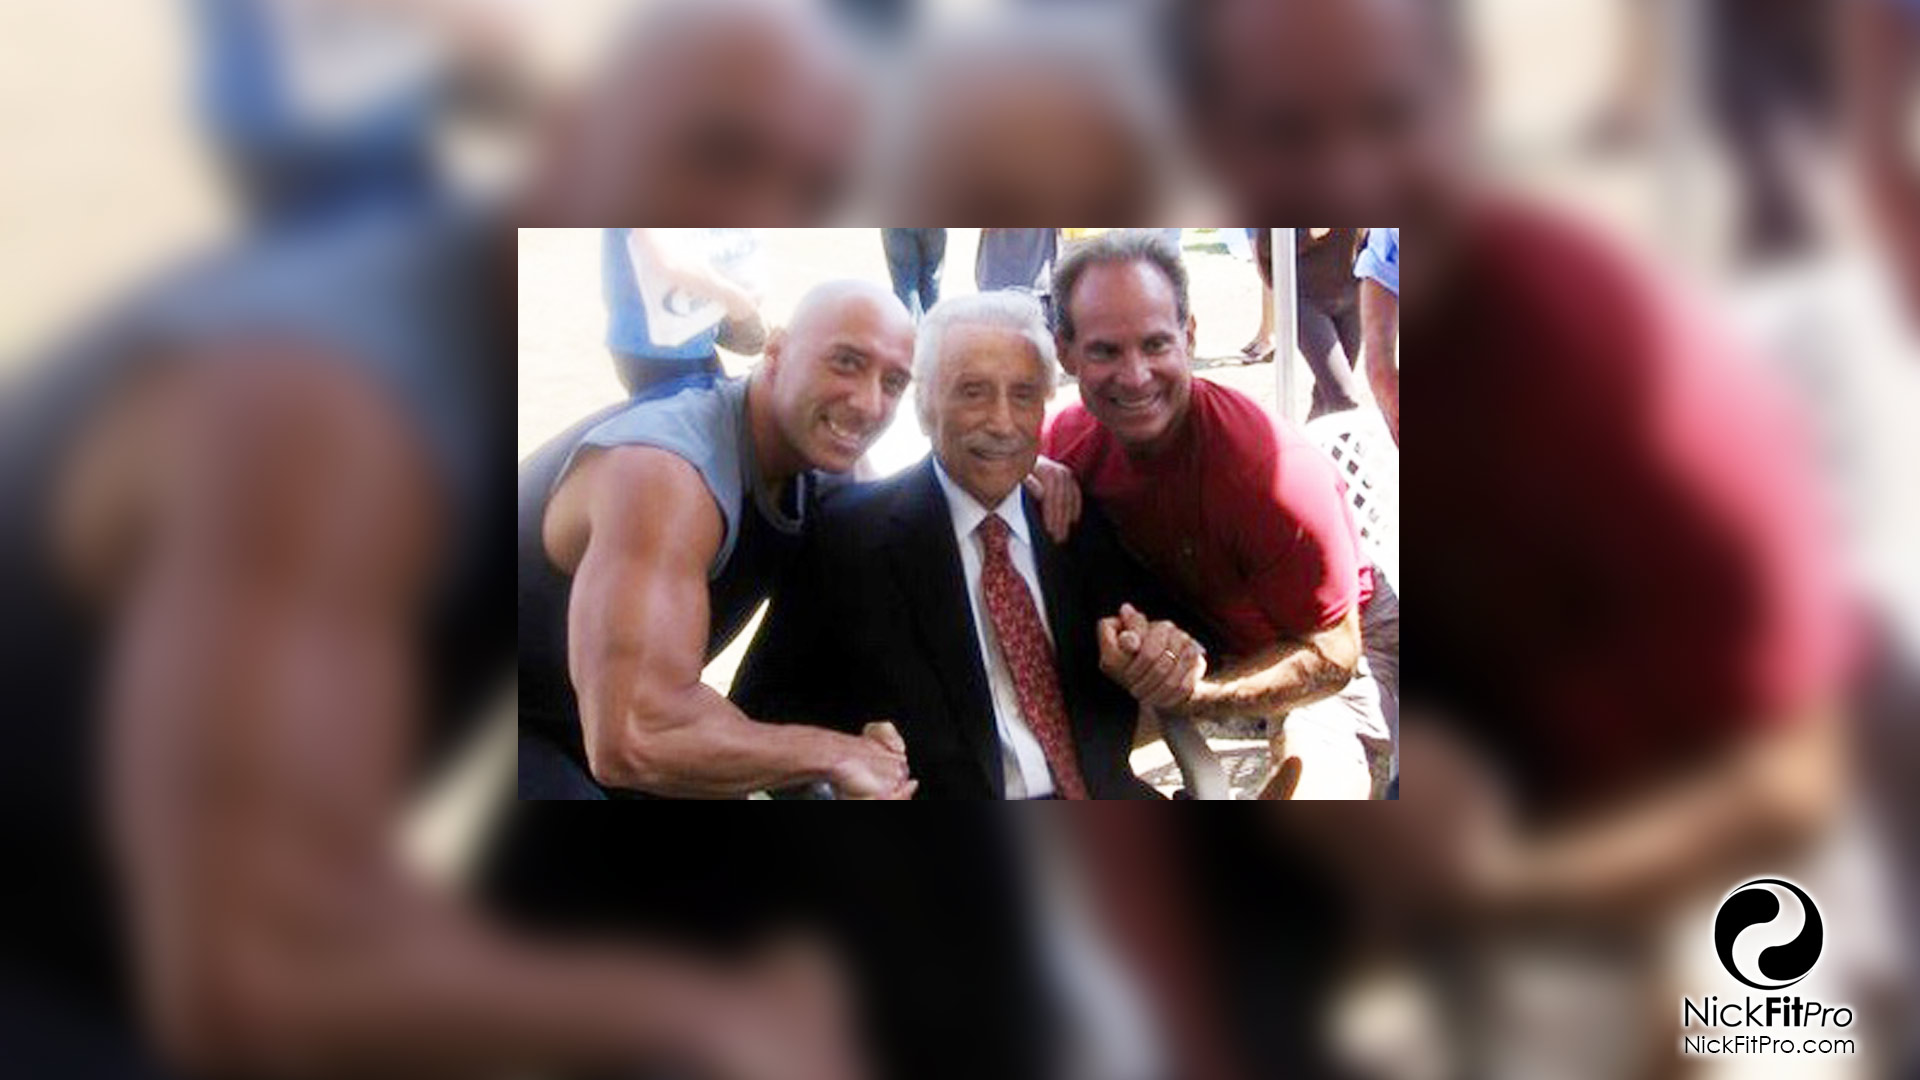 Awards ceremony hosted Mike Torchia for our pal Joe Weider-the godfather of fitness!